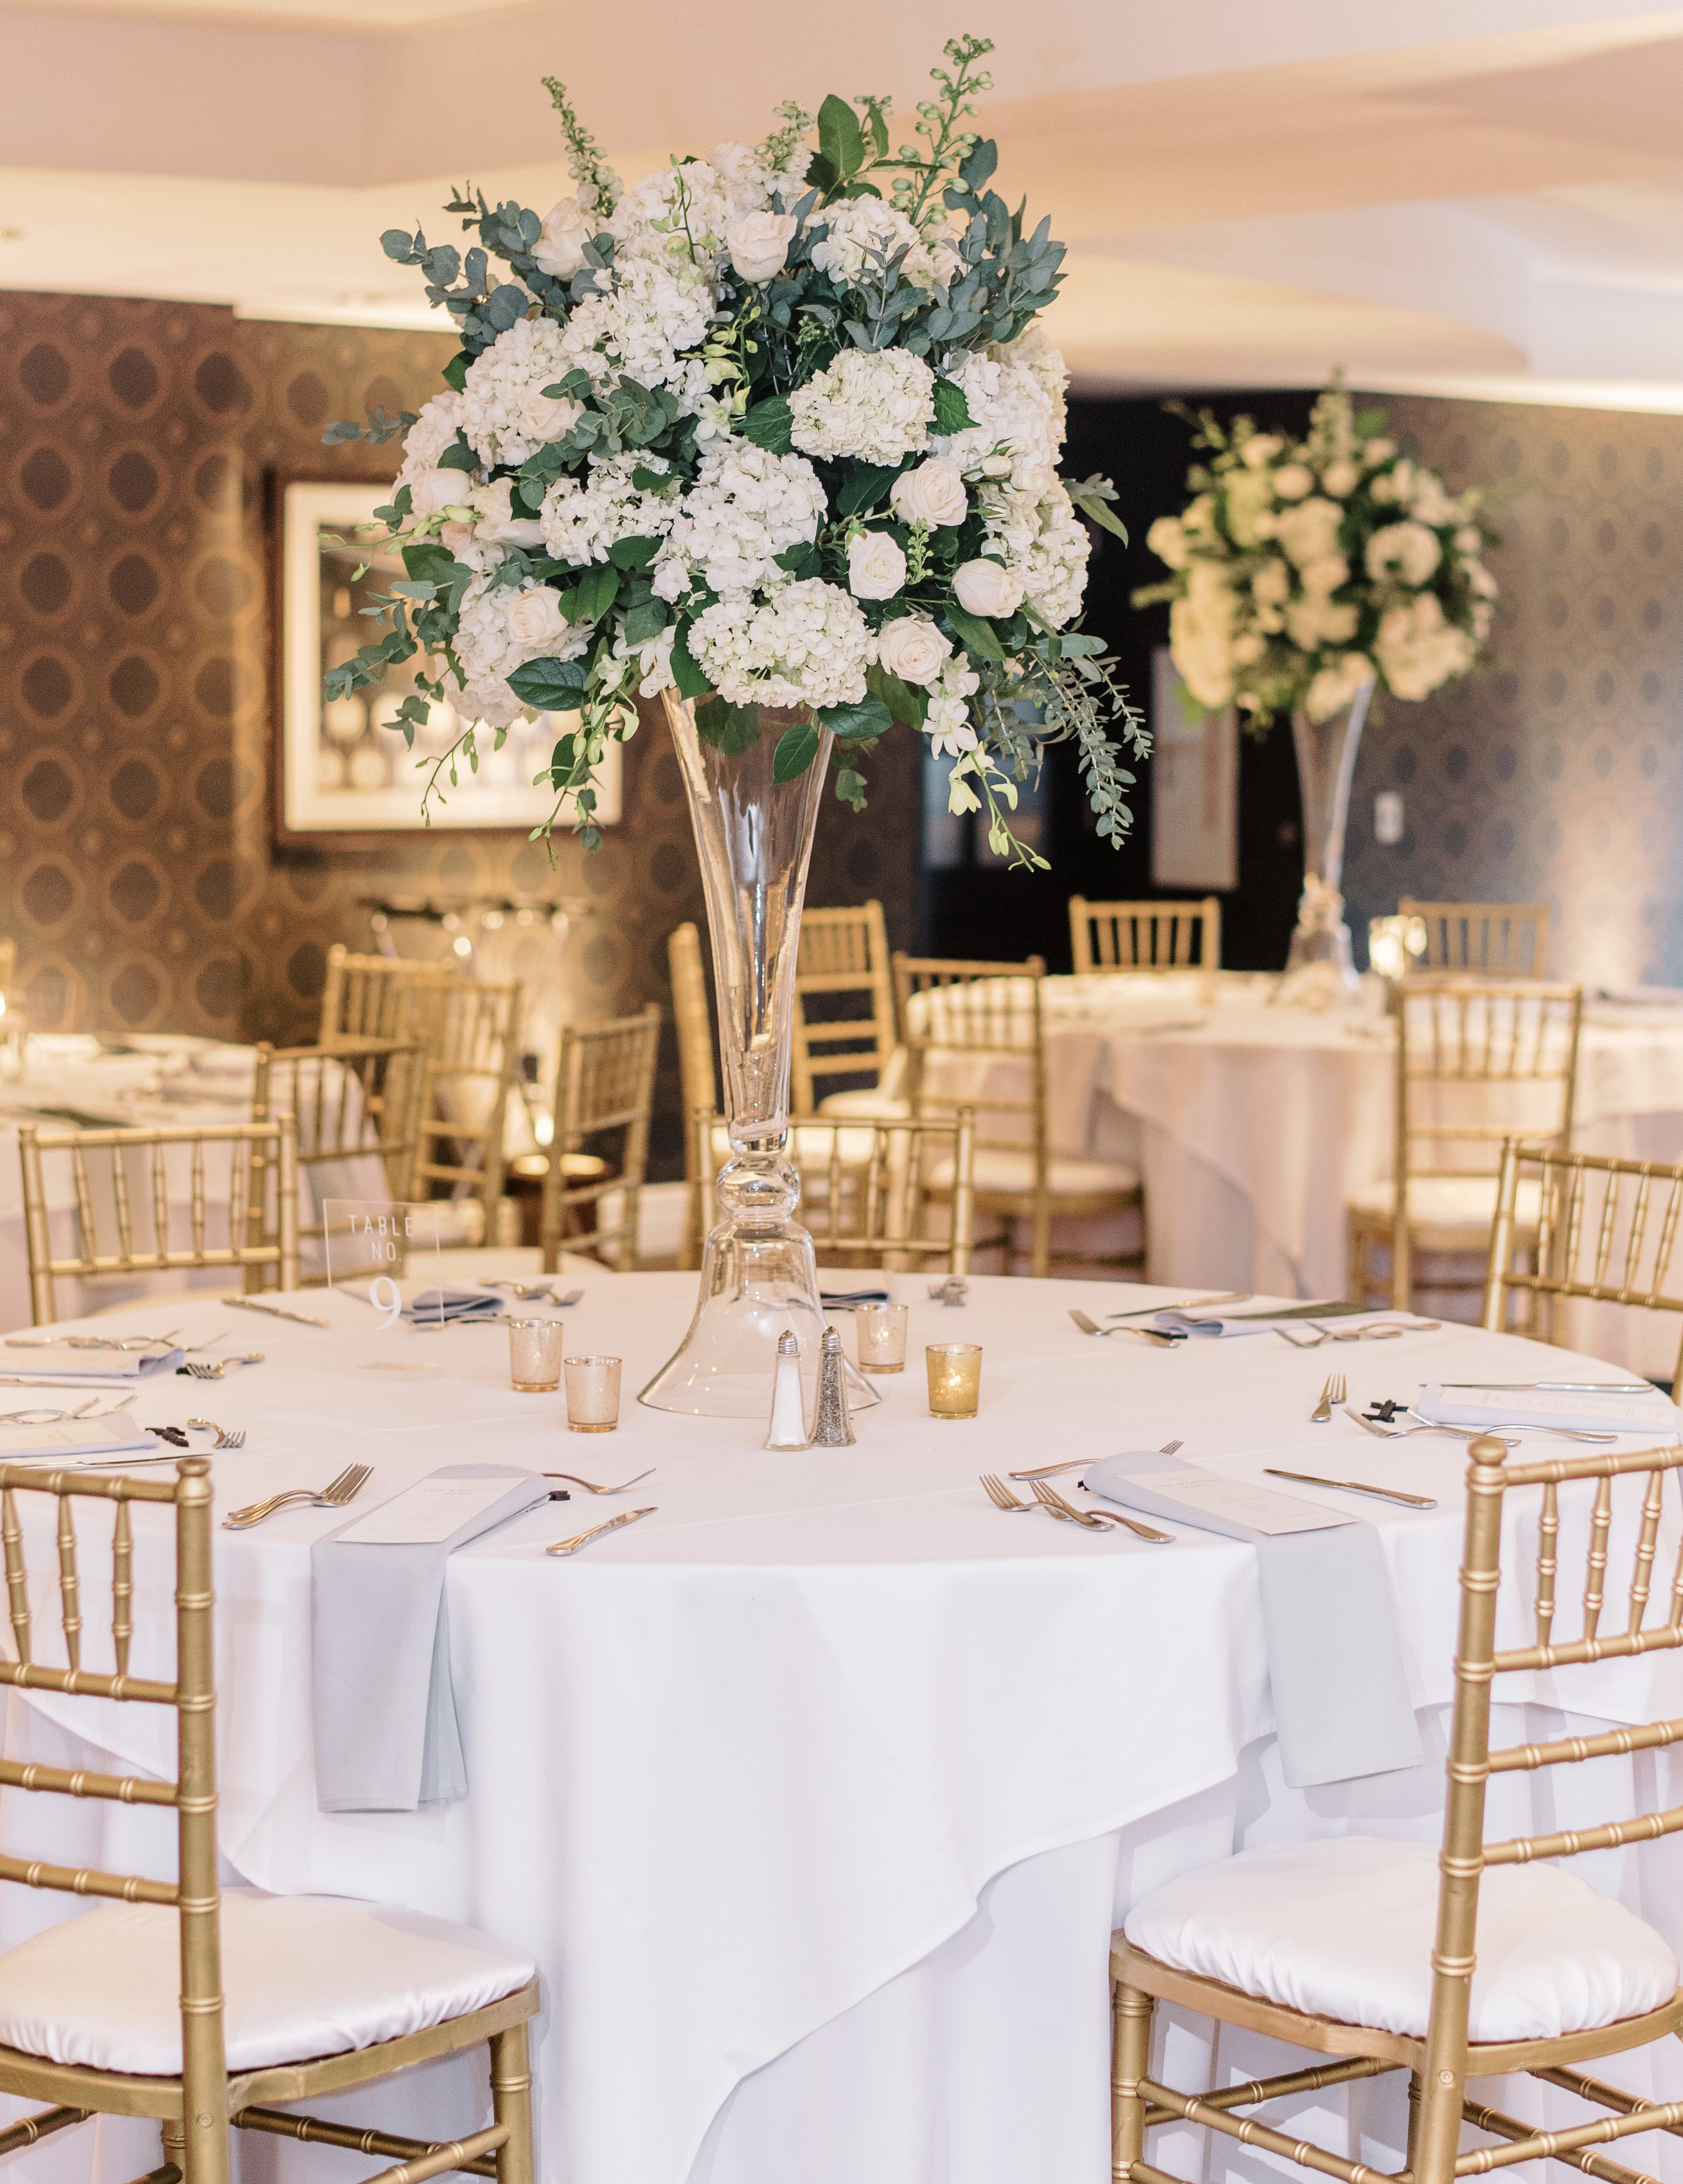 The floral centerpieces are set up in the middle of the tables on classic glass risers with white hydrangea and roses.